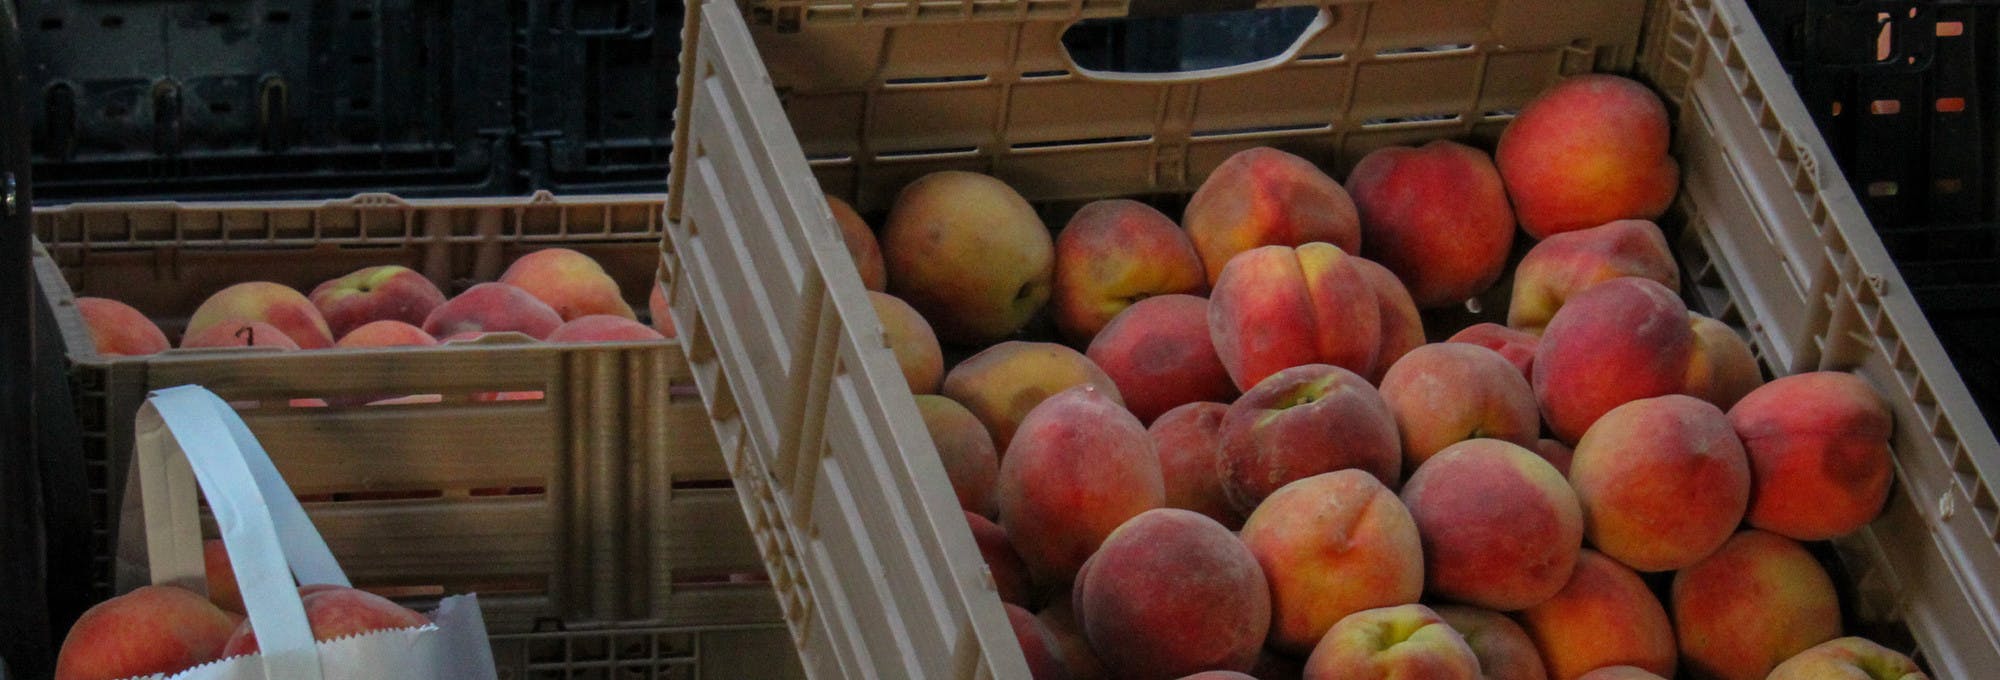 basket of peaches for sale which represents total surplus